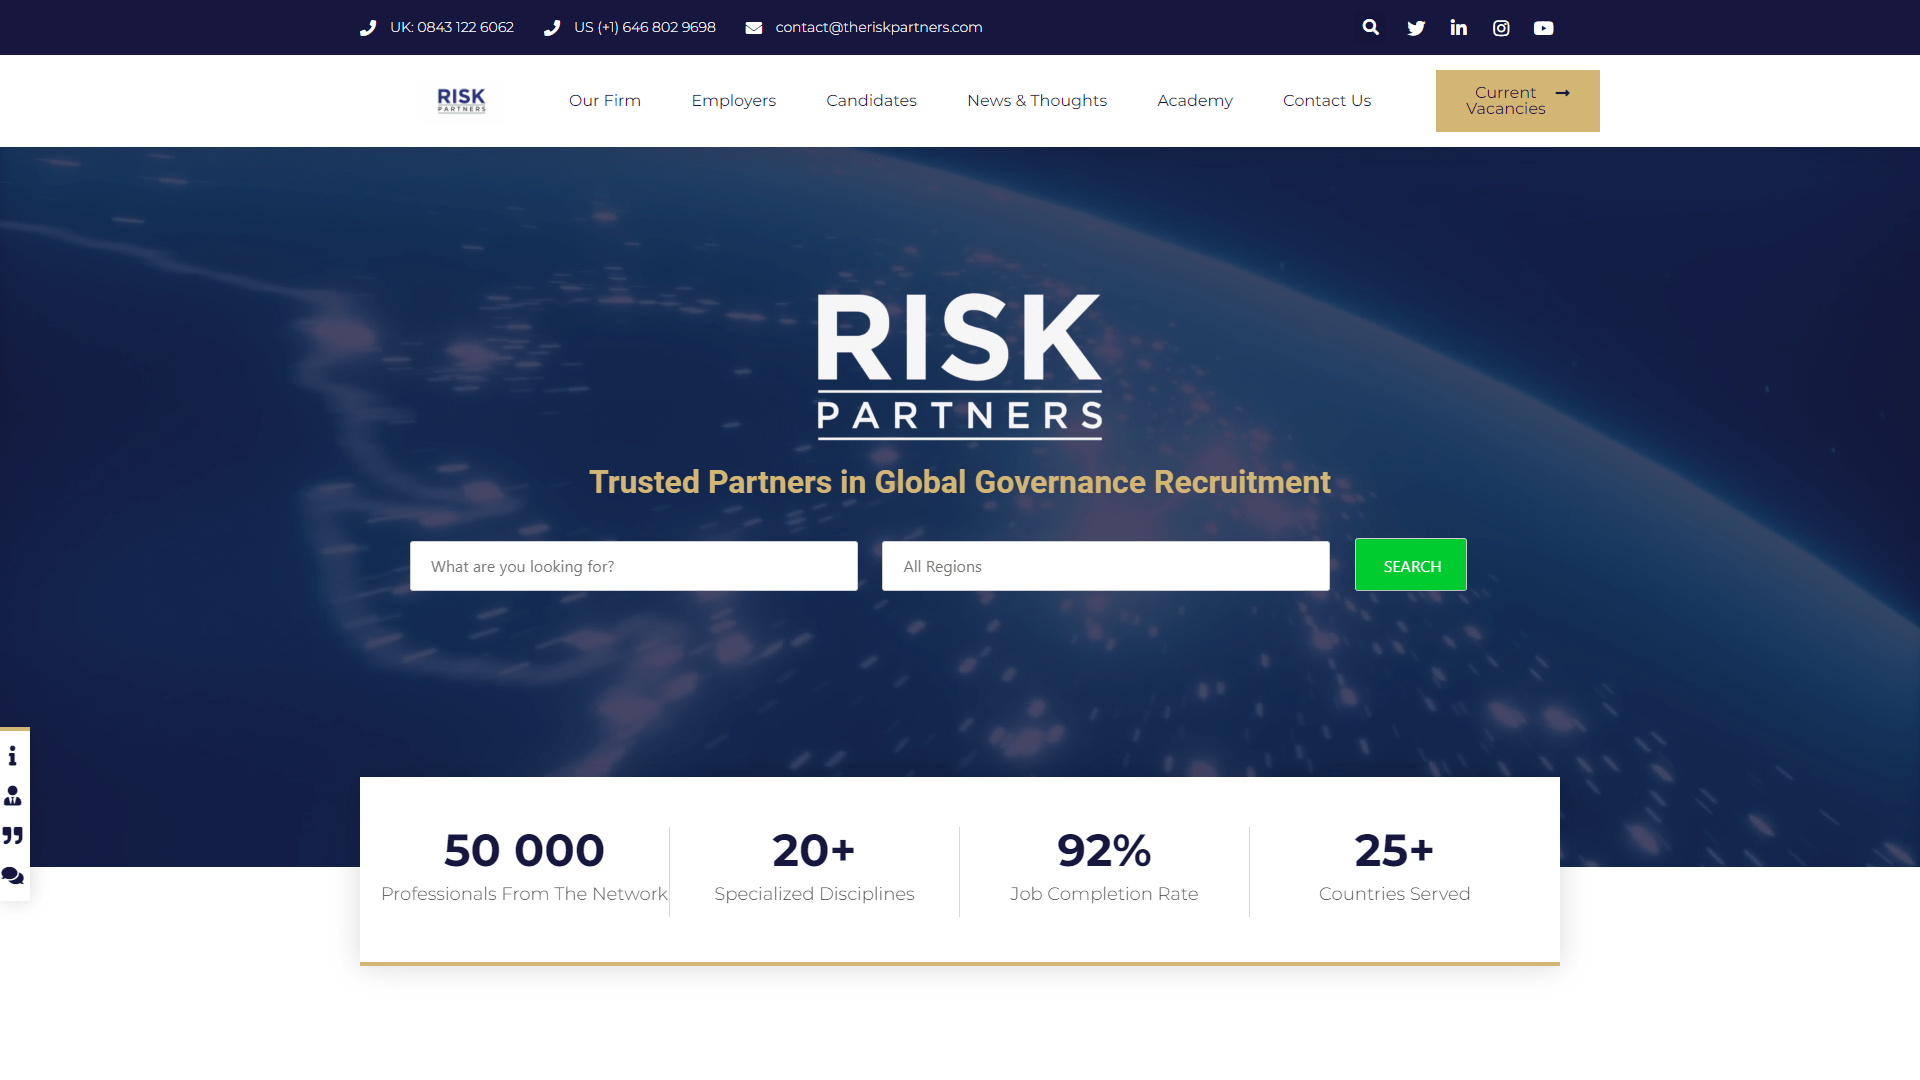 The Risk Partners